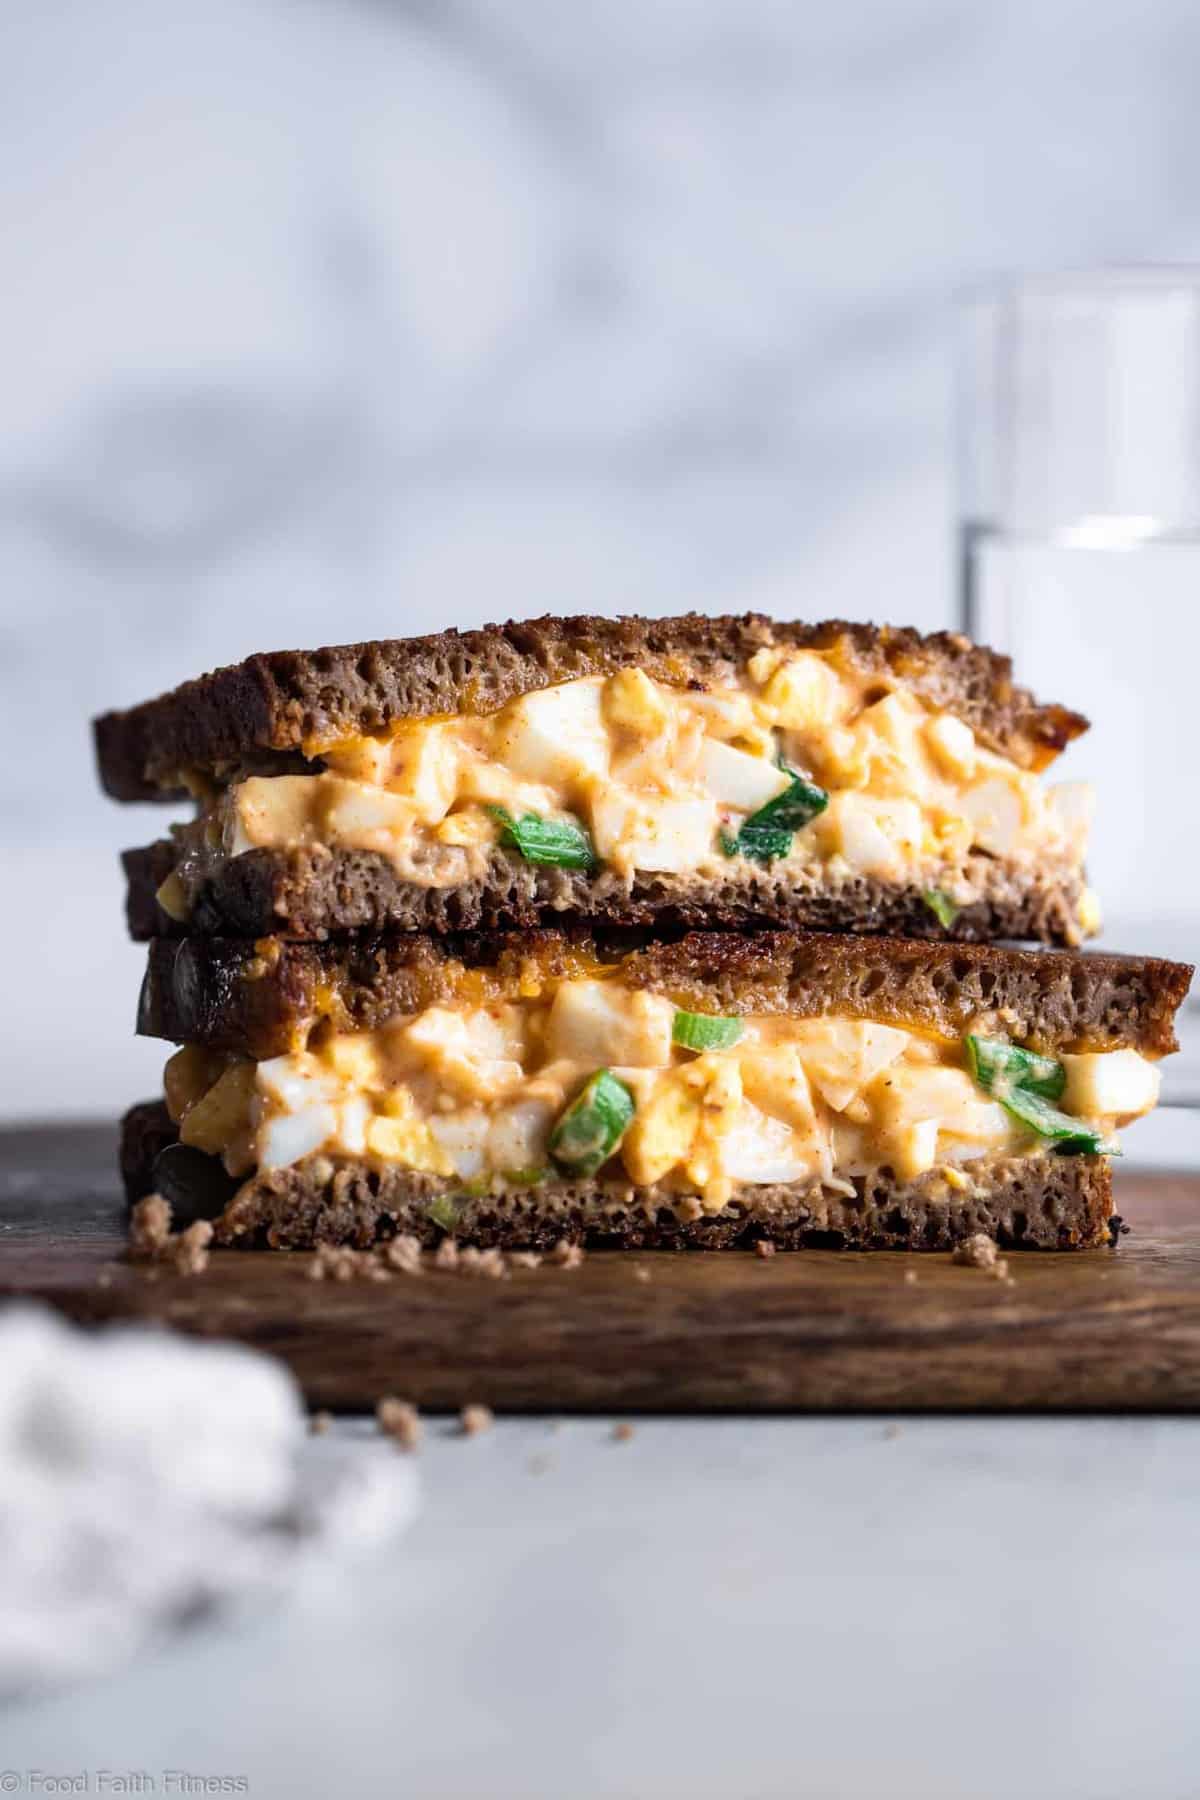 Healthy Egg Salad Grilled Cheese Sandwich - A fun twist on a classic that is quick, easy and great for kids and adults! High protein and Gluten Free option! | #Foodfaithfitness | #Healthy #Glutenfree #Sandwich #lunch